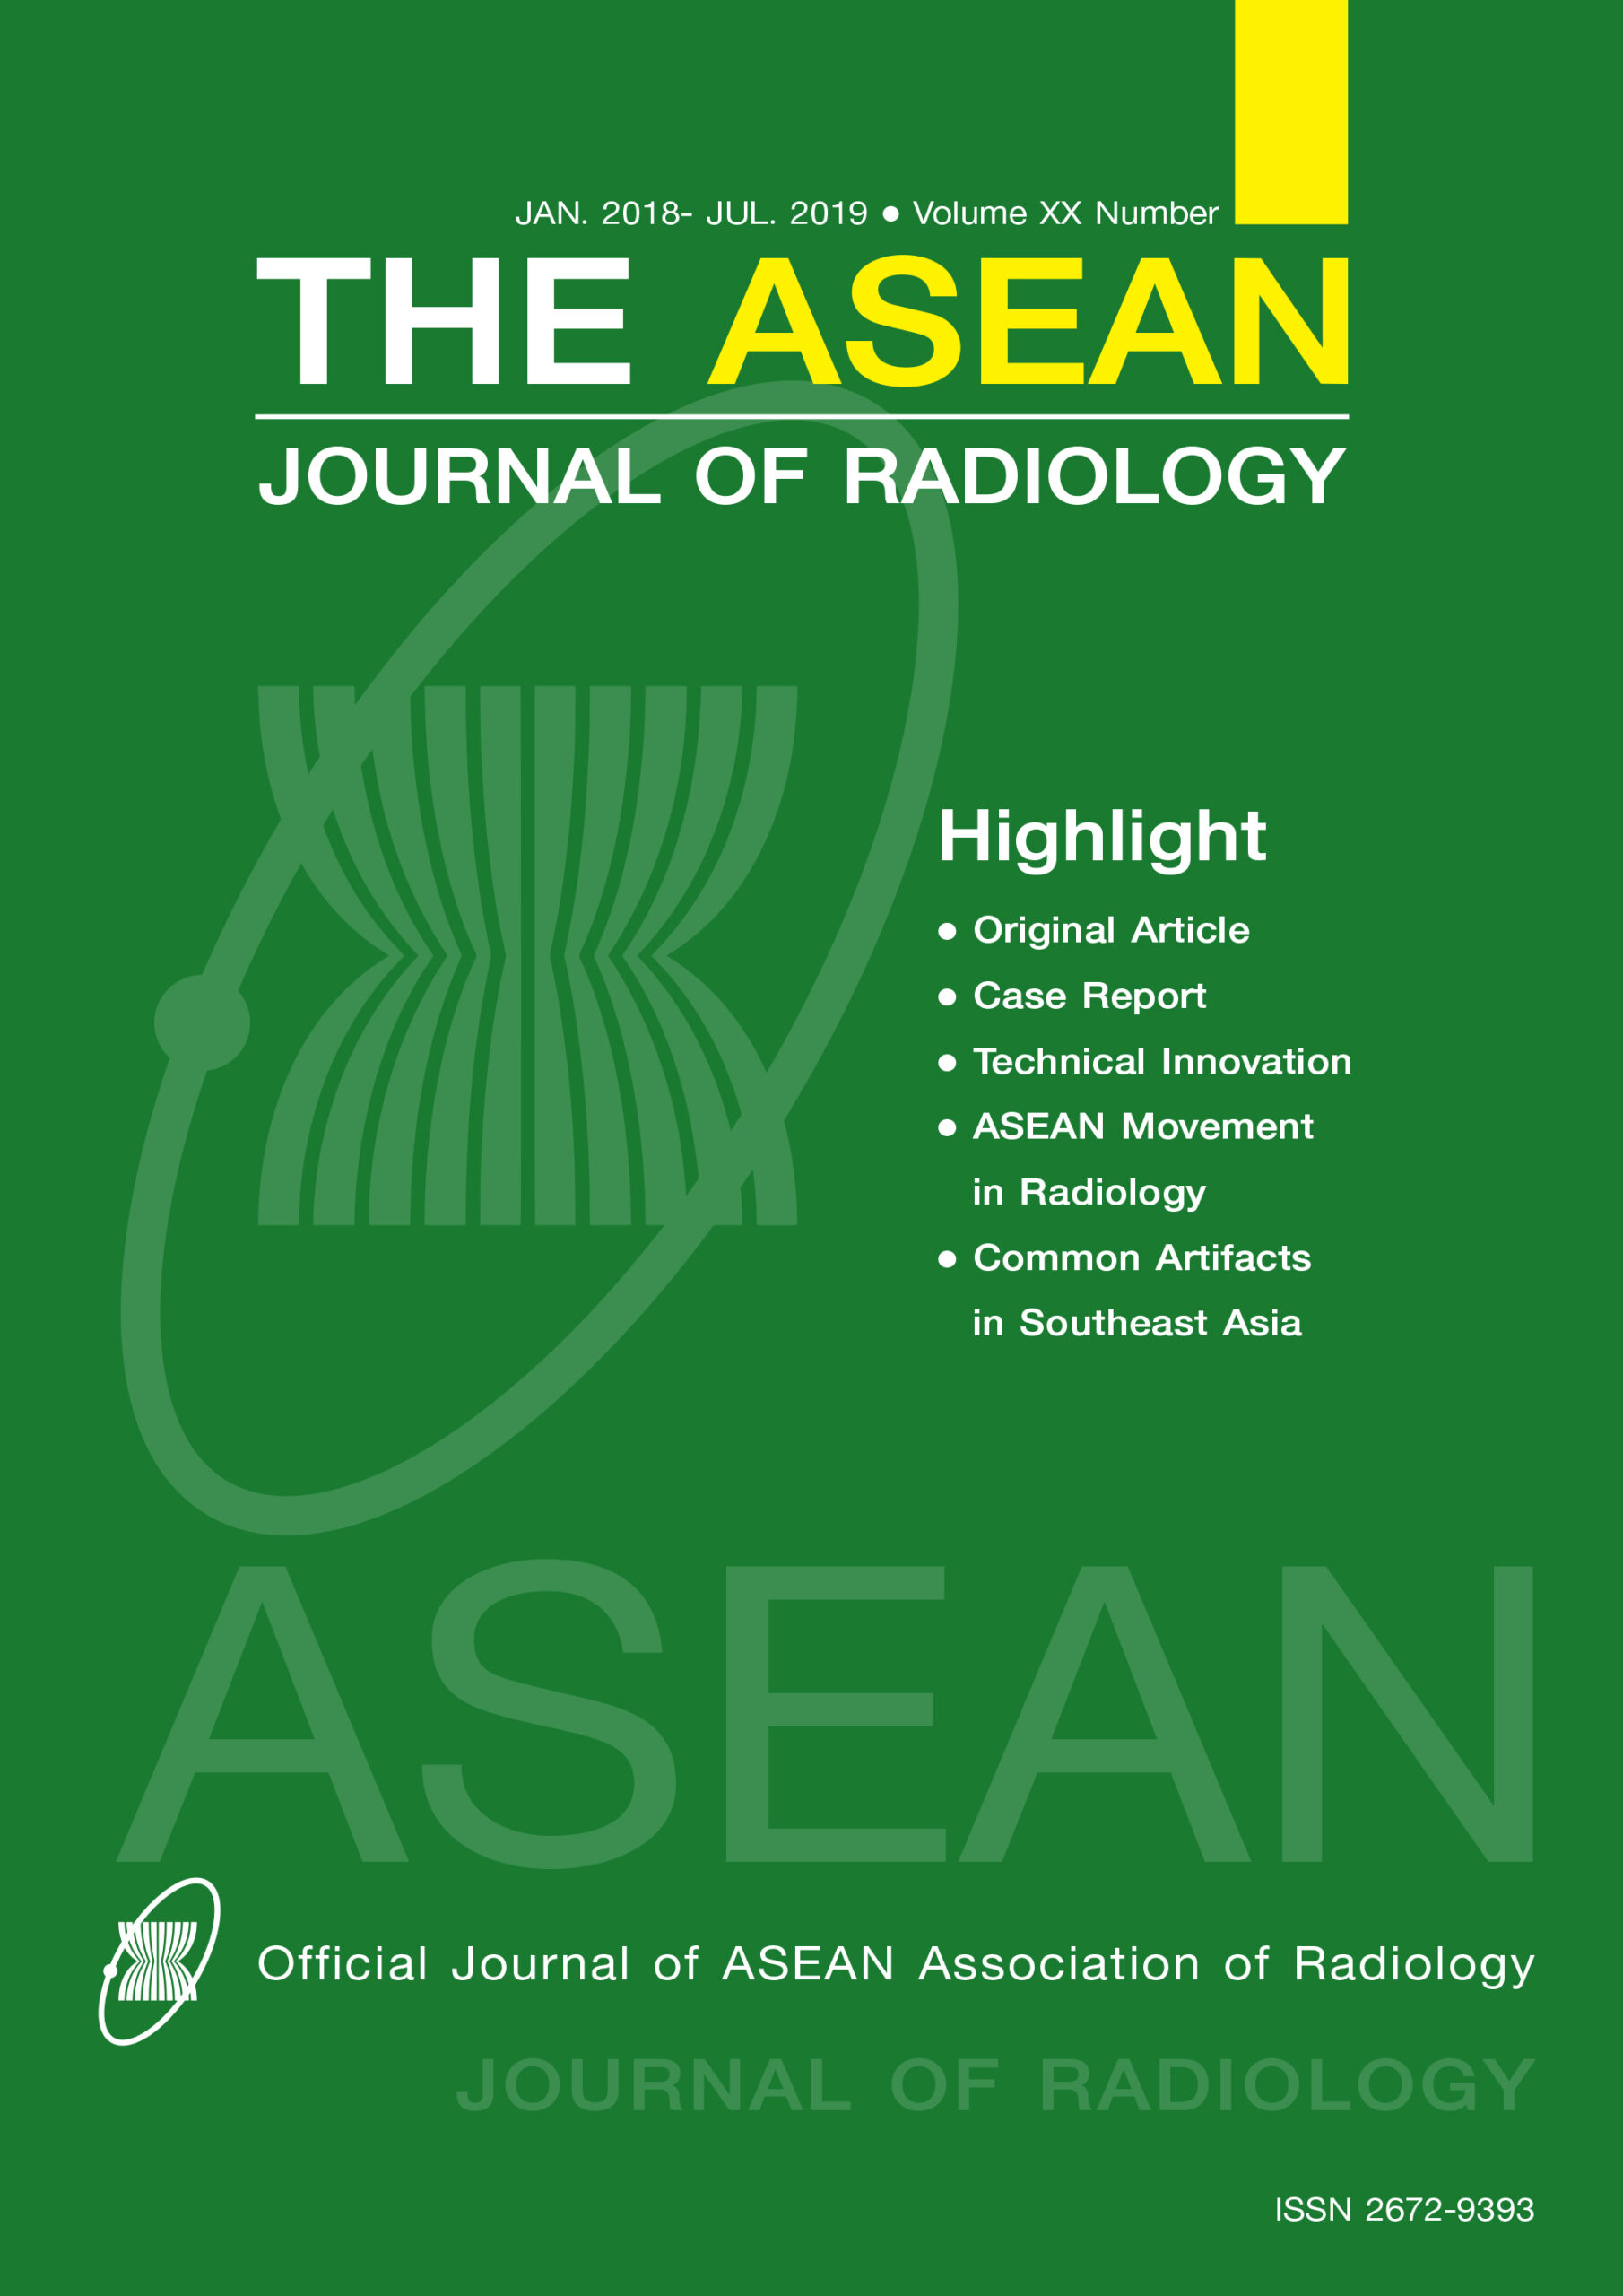 Vol. 20 No. 1 (2019): The first fully online issue of The ASEAN Journal of Radiology 1